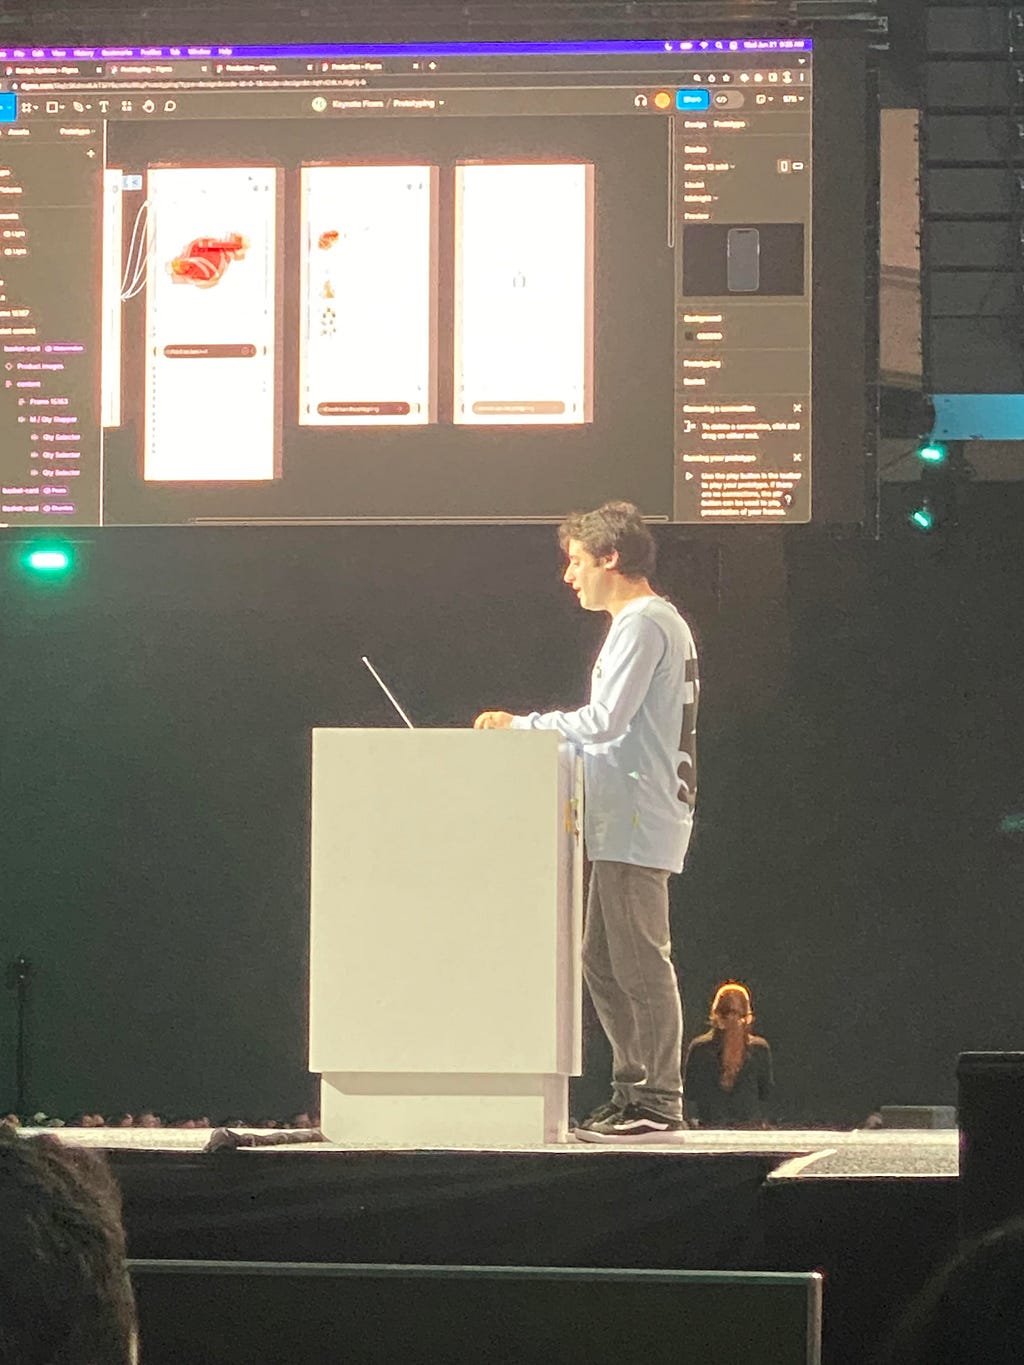 Figma CEO Dylan Field at the podium during the opening keynote